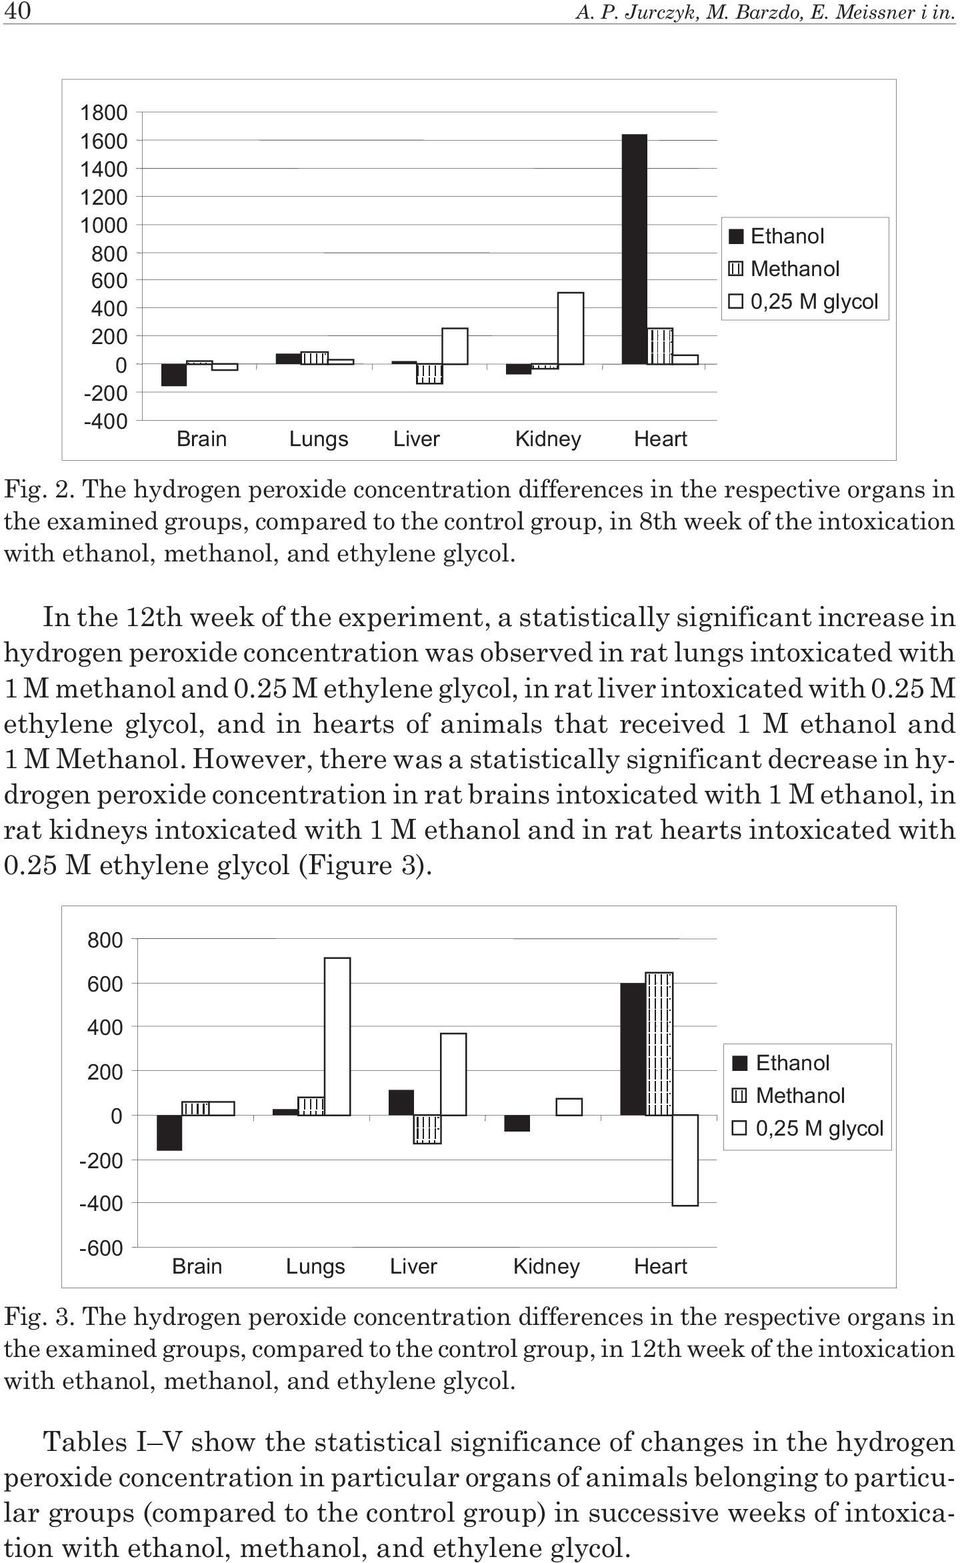 The hydrogen peroxide concentration differences in the respective organs in the examined groups, compared to the control group, in 8th week of the intoxication with ethanol, methanol, and ethylene